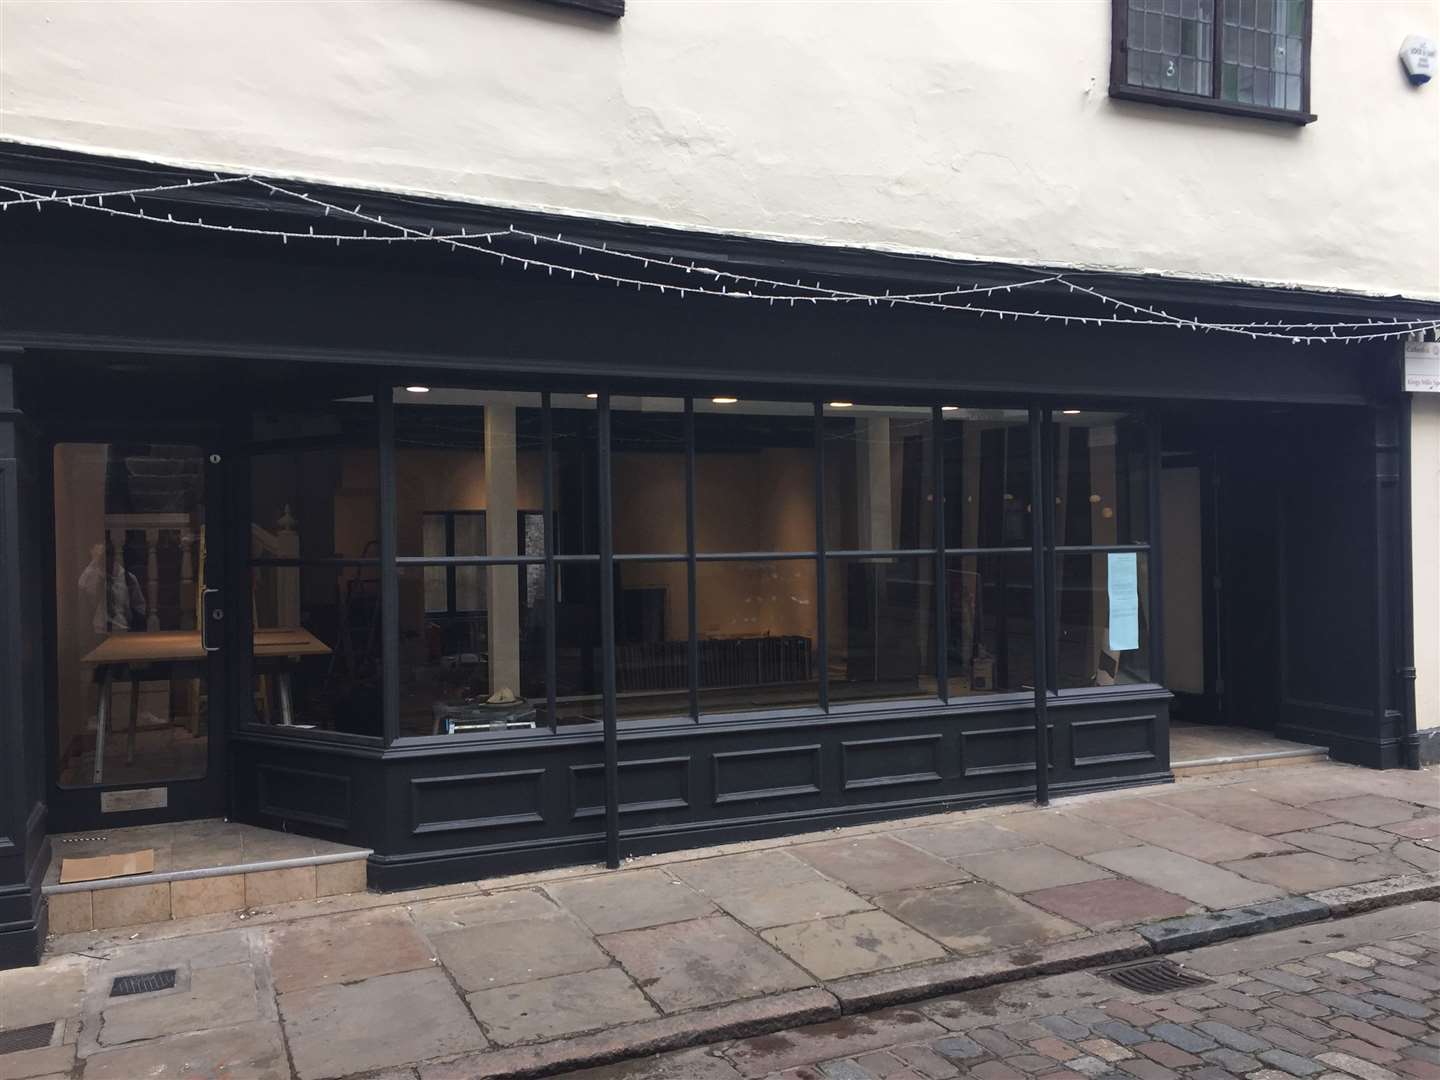 Corkk will open in the former Trailfinders premises in the centre of Canterbury